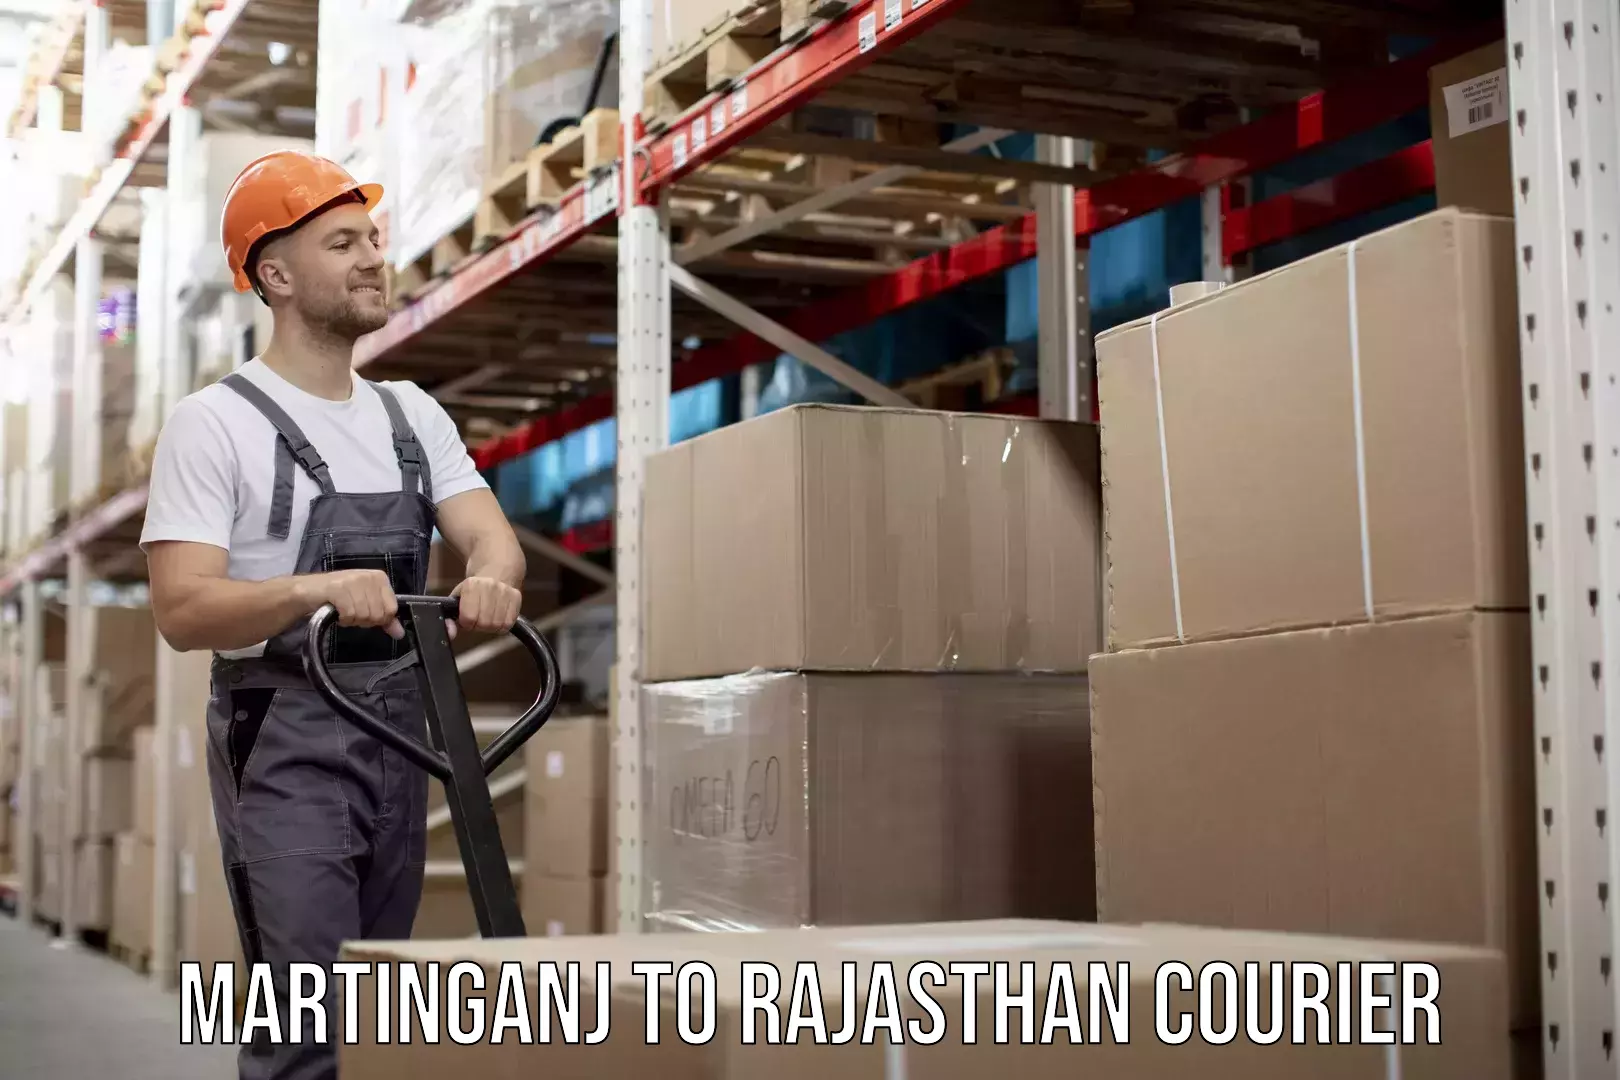 Quality relocation assistance Martinganj to Rajasthan